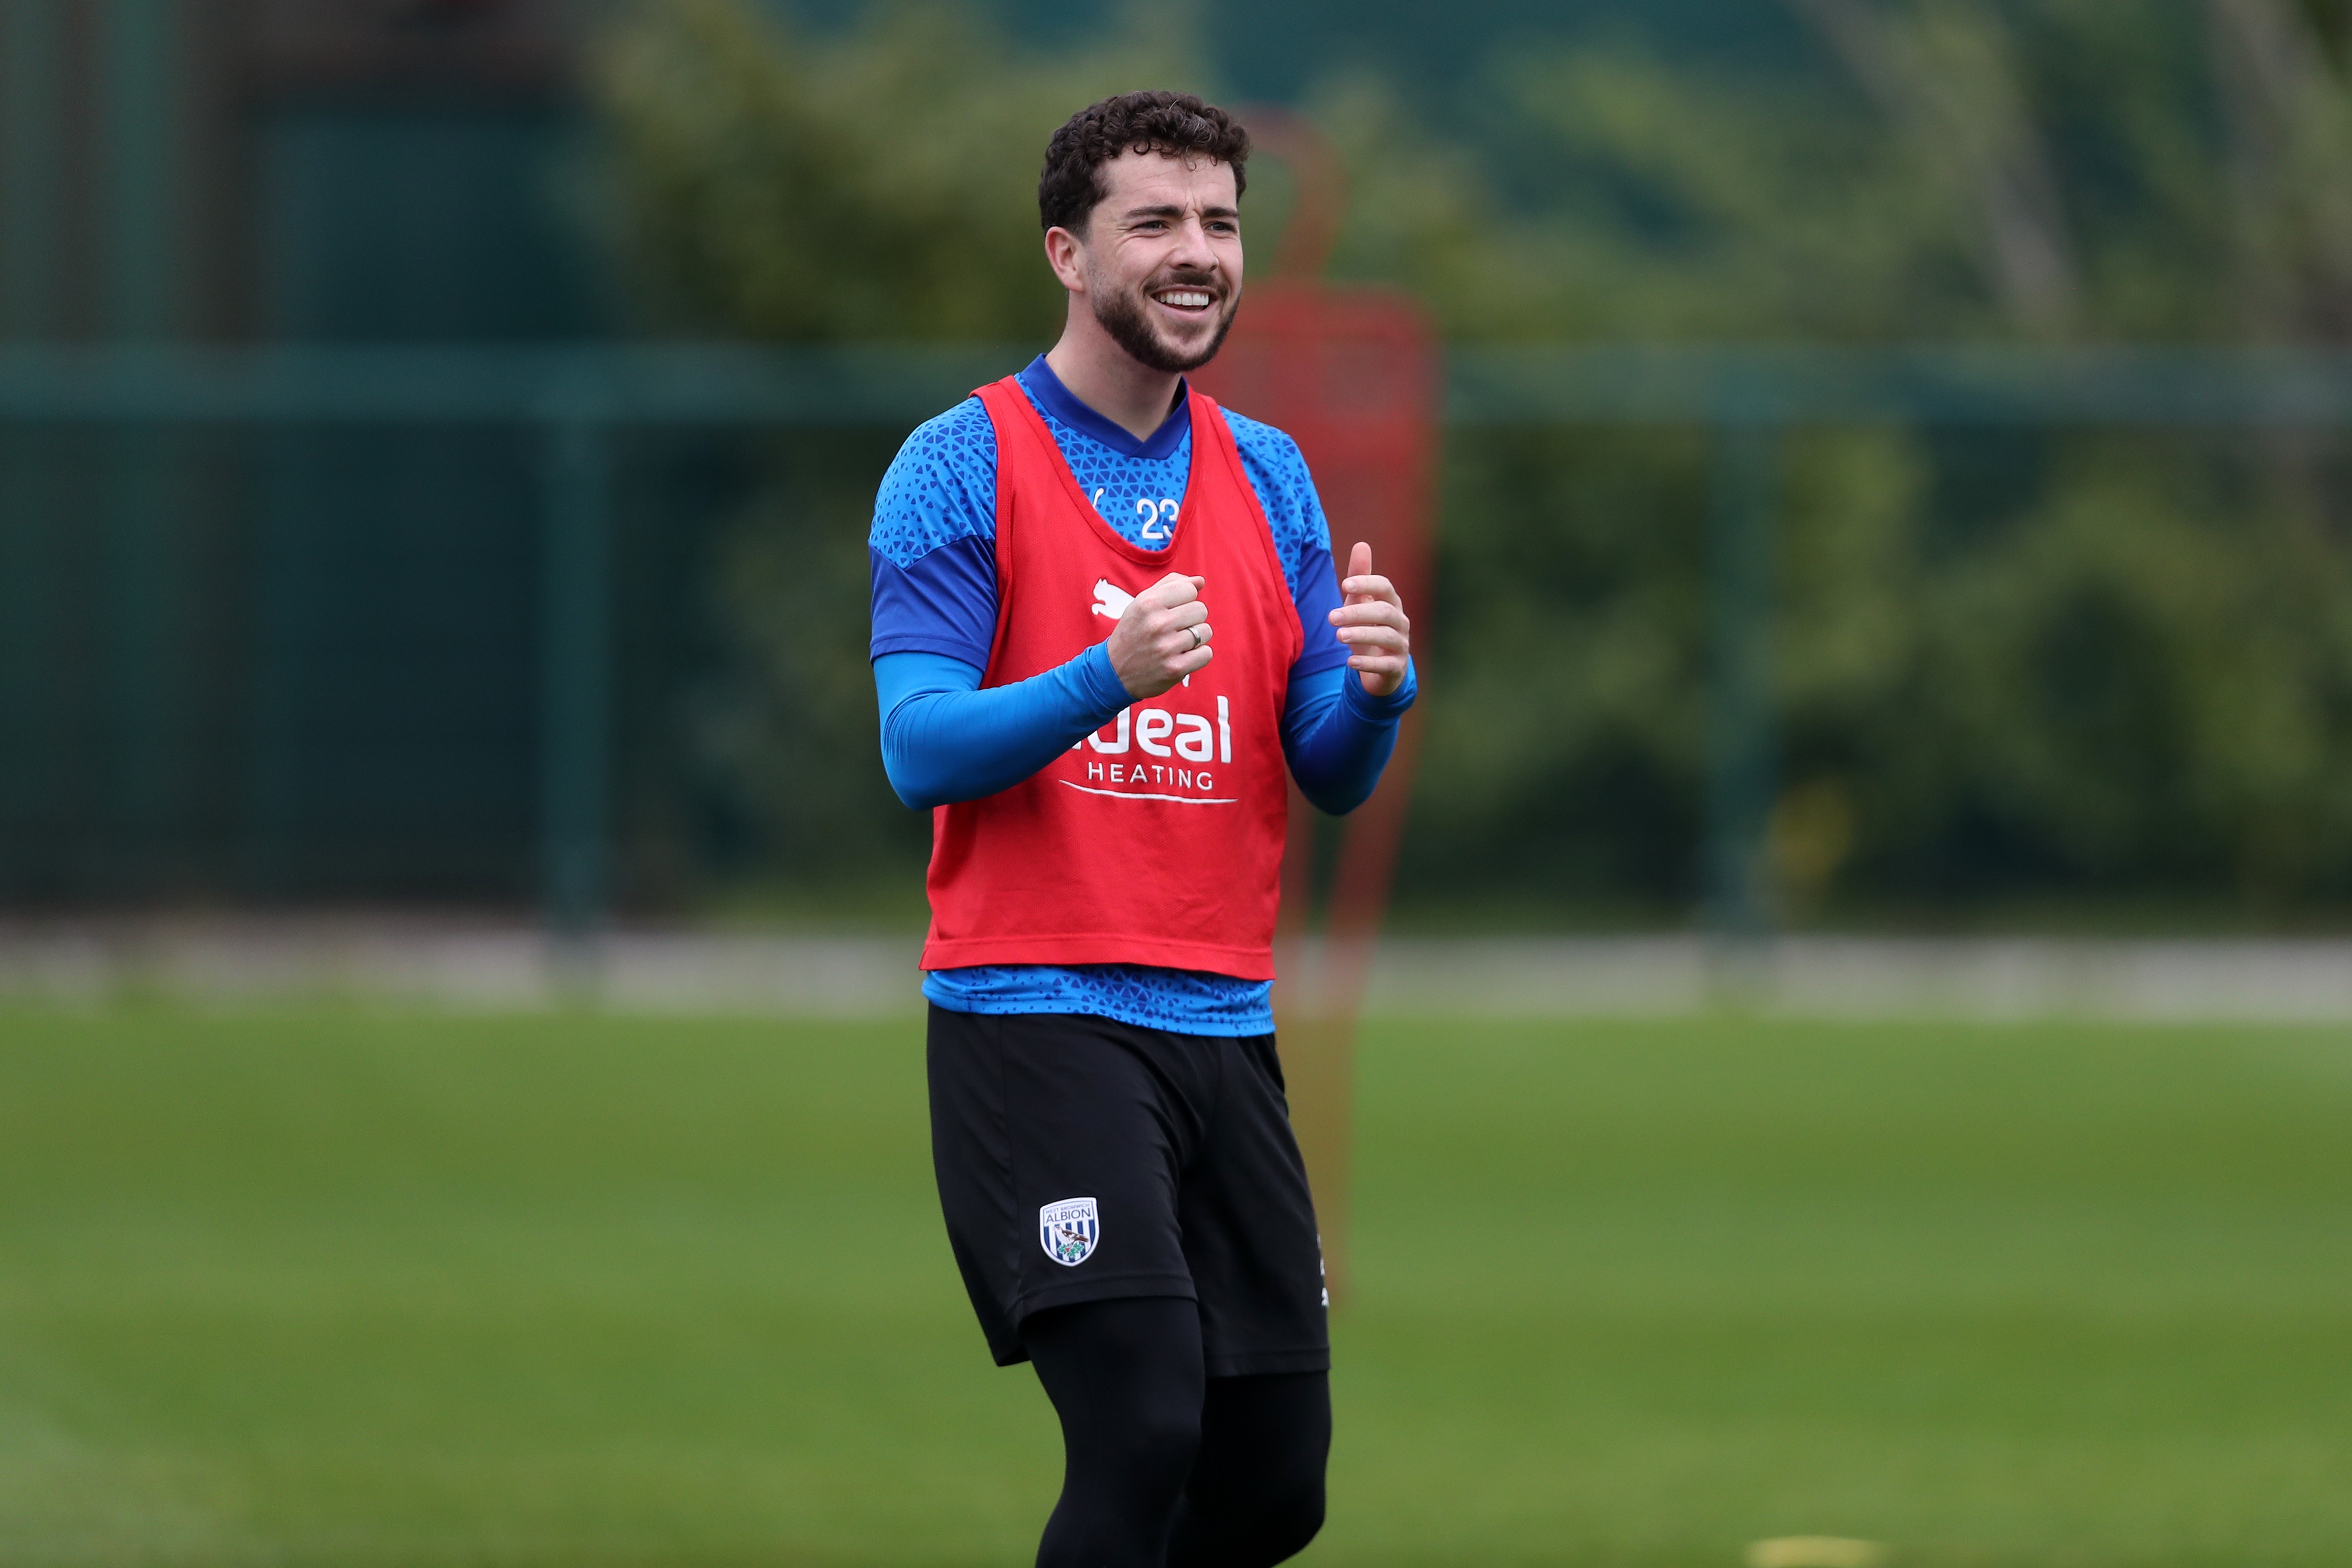 Mikey Johnston smiling during a training session